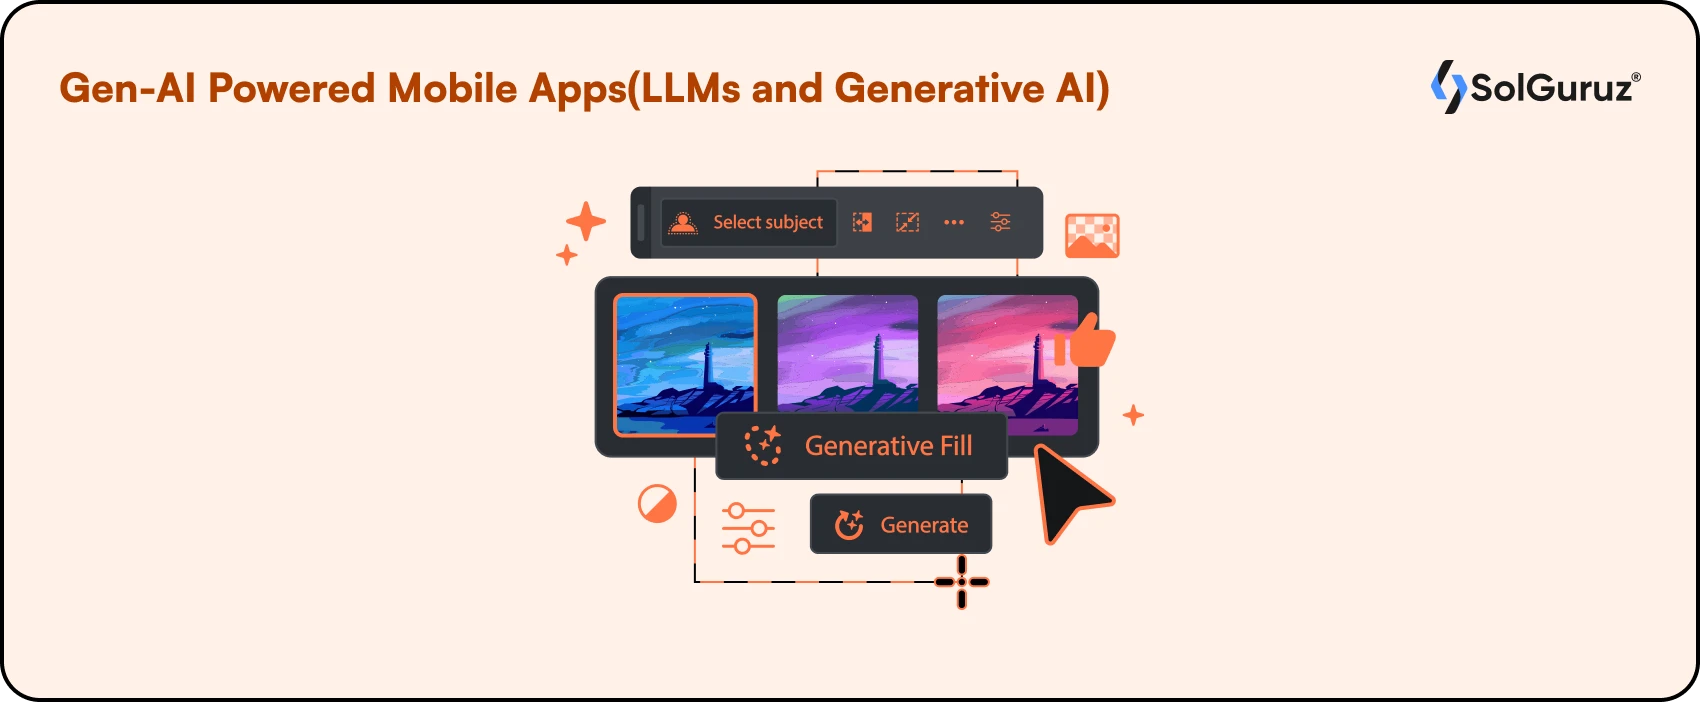 Gen-AI Powered Mobile Apps (LLMs and Generative AI)